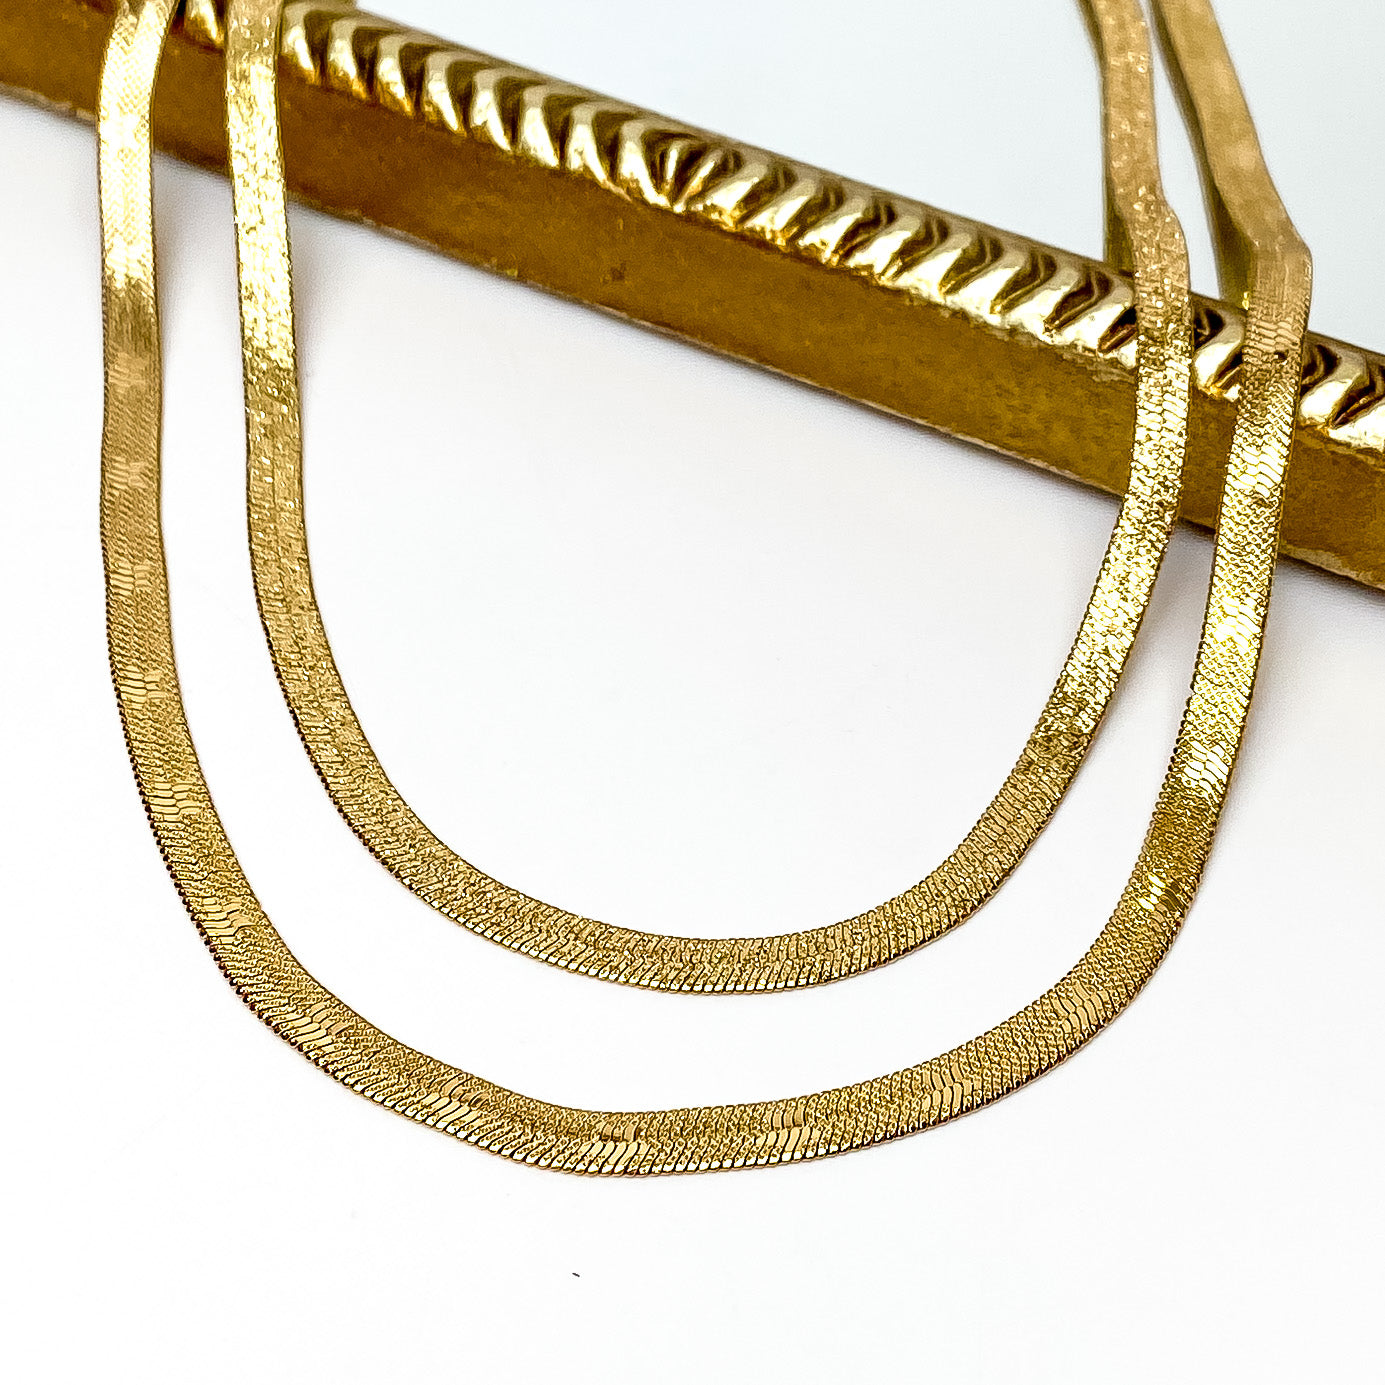 Double layered gold herringbone chain necklace. The longer strand has star imprints throughout the chain. This necklace is pictured partially laying on a gold mirror on a white background. 